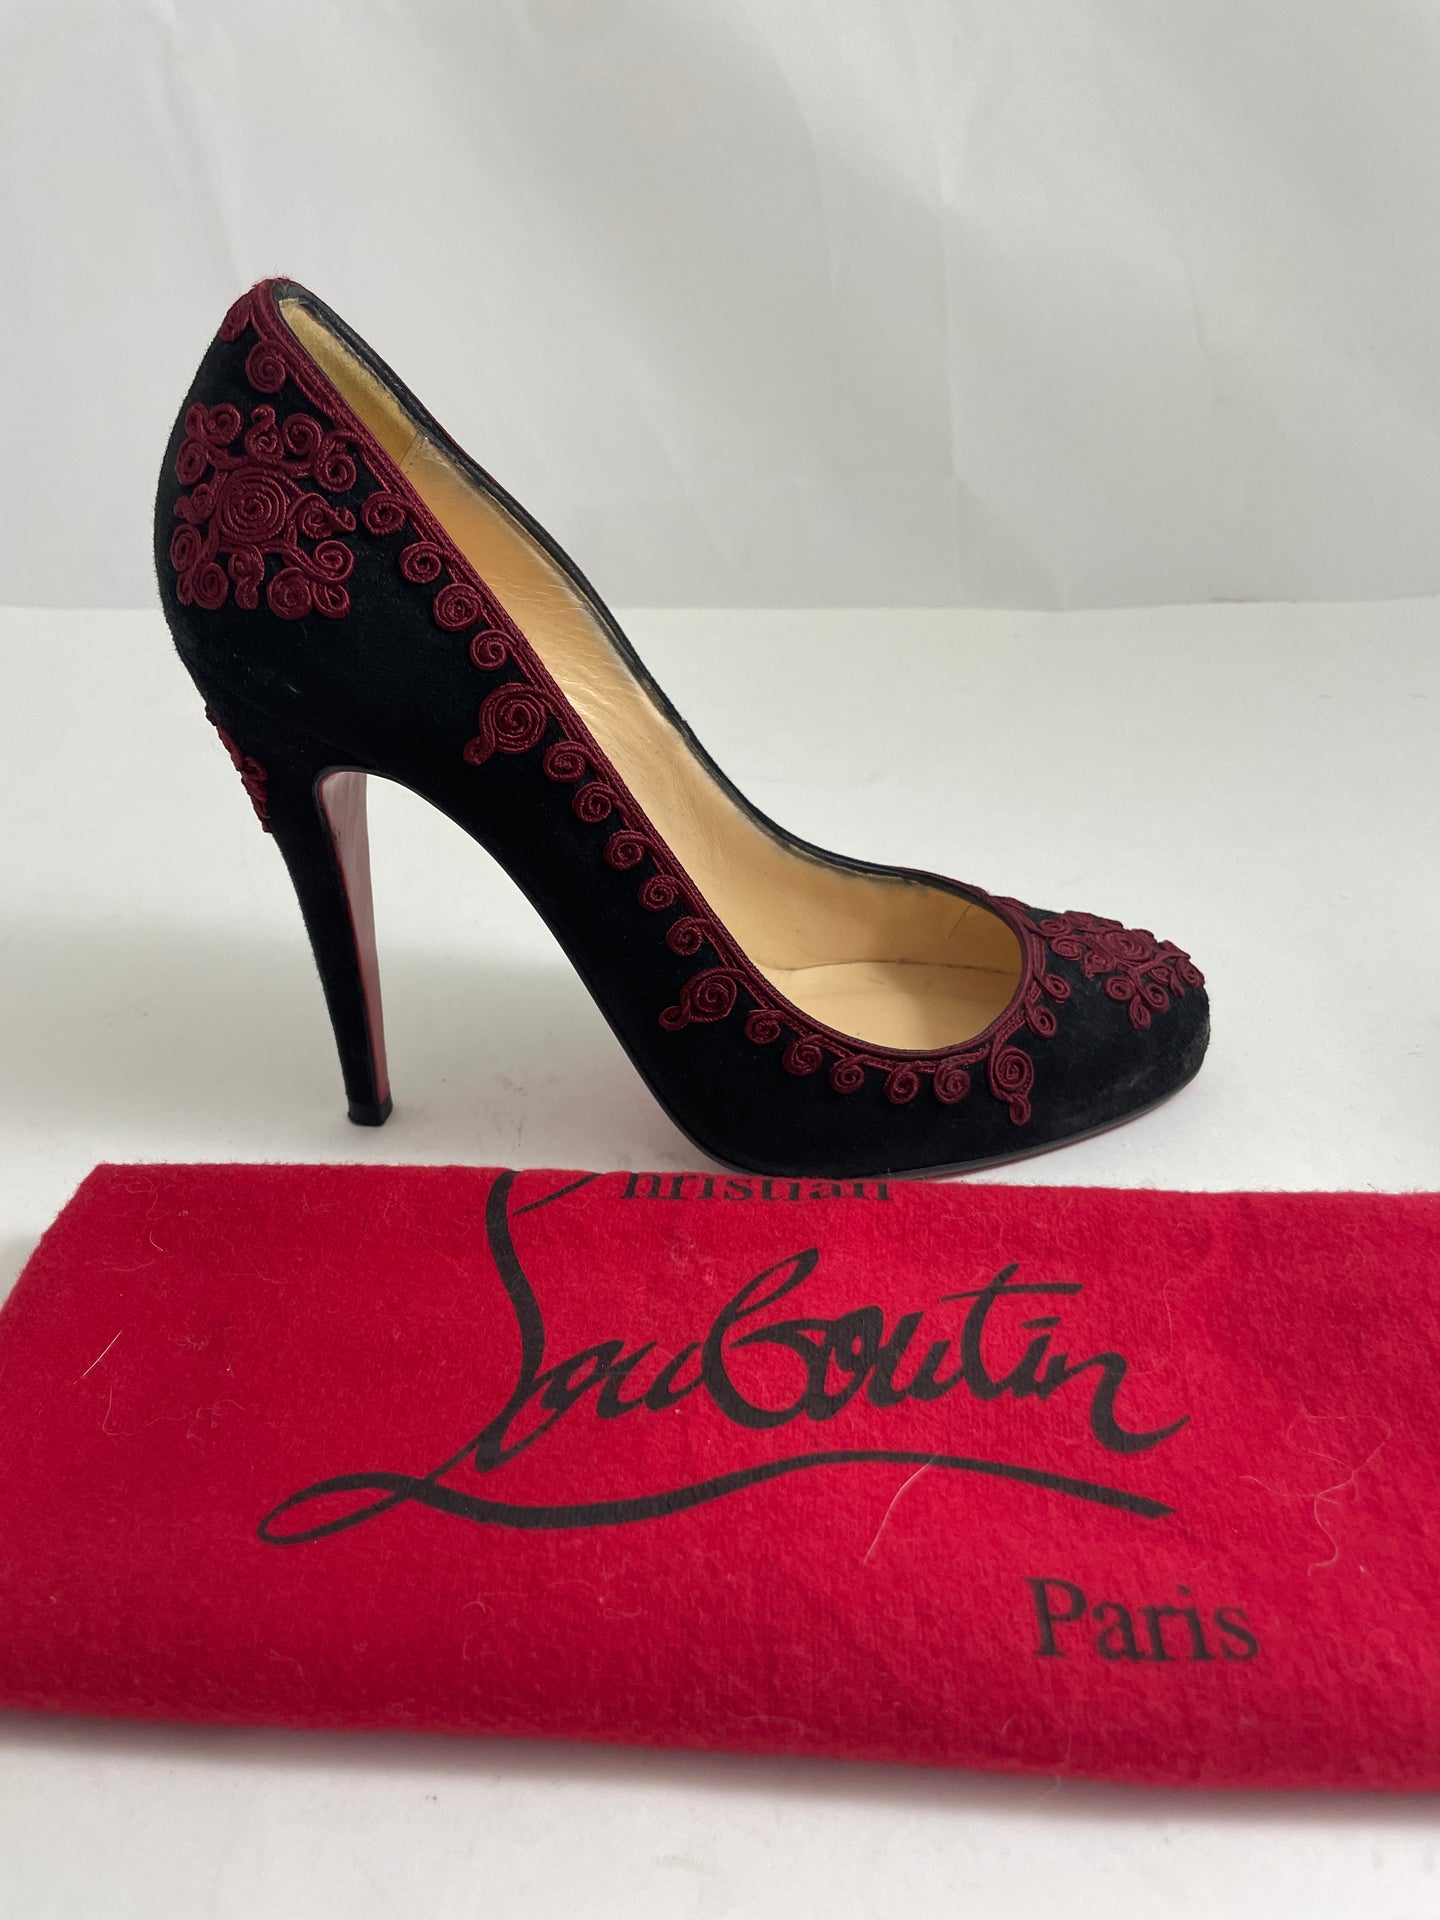 Christian Louboutin Black Suede With Burgundy Embellishment Pumps